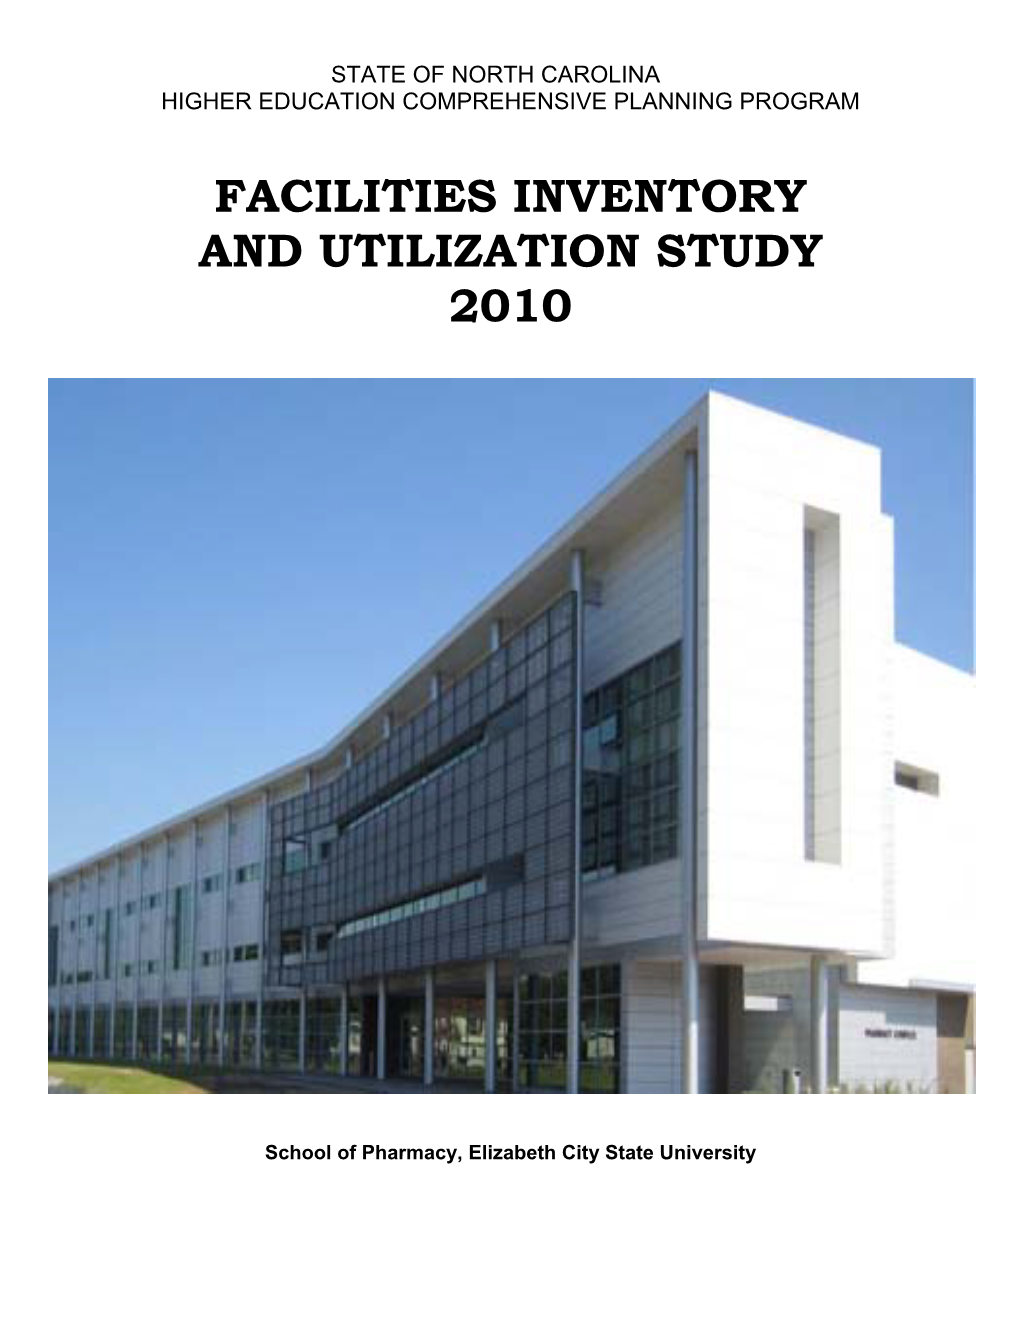 Facilities Inventory and Utilization Study 2010